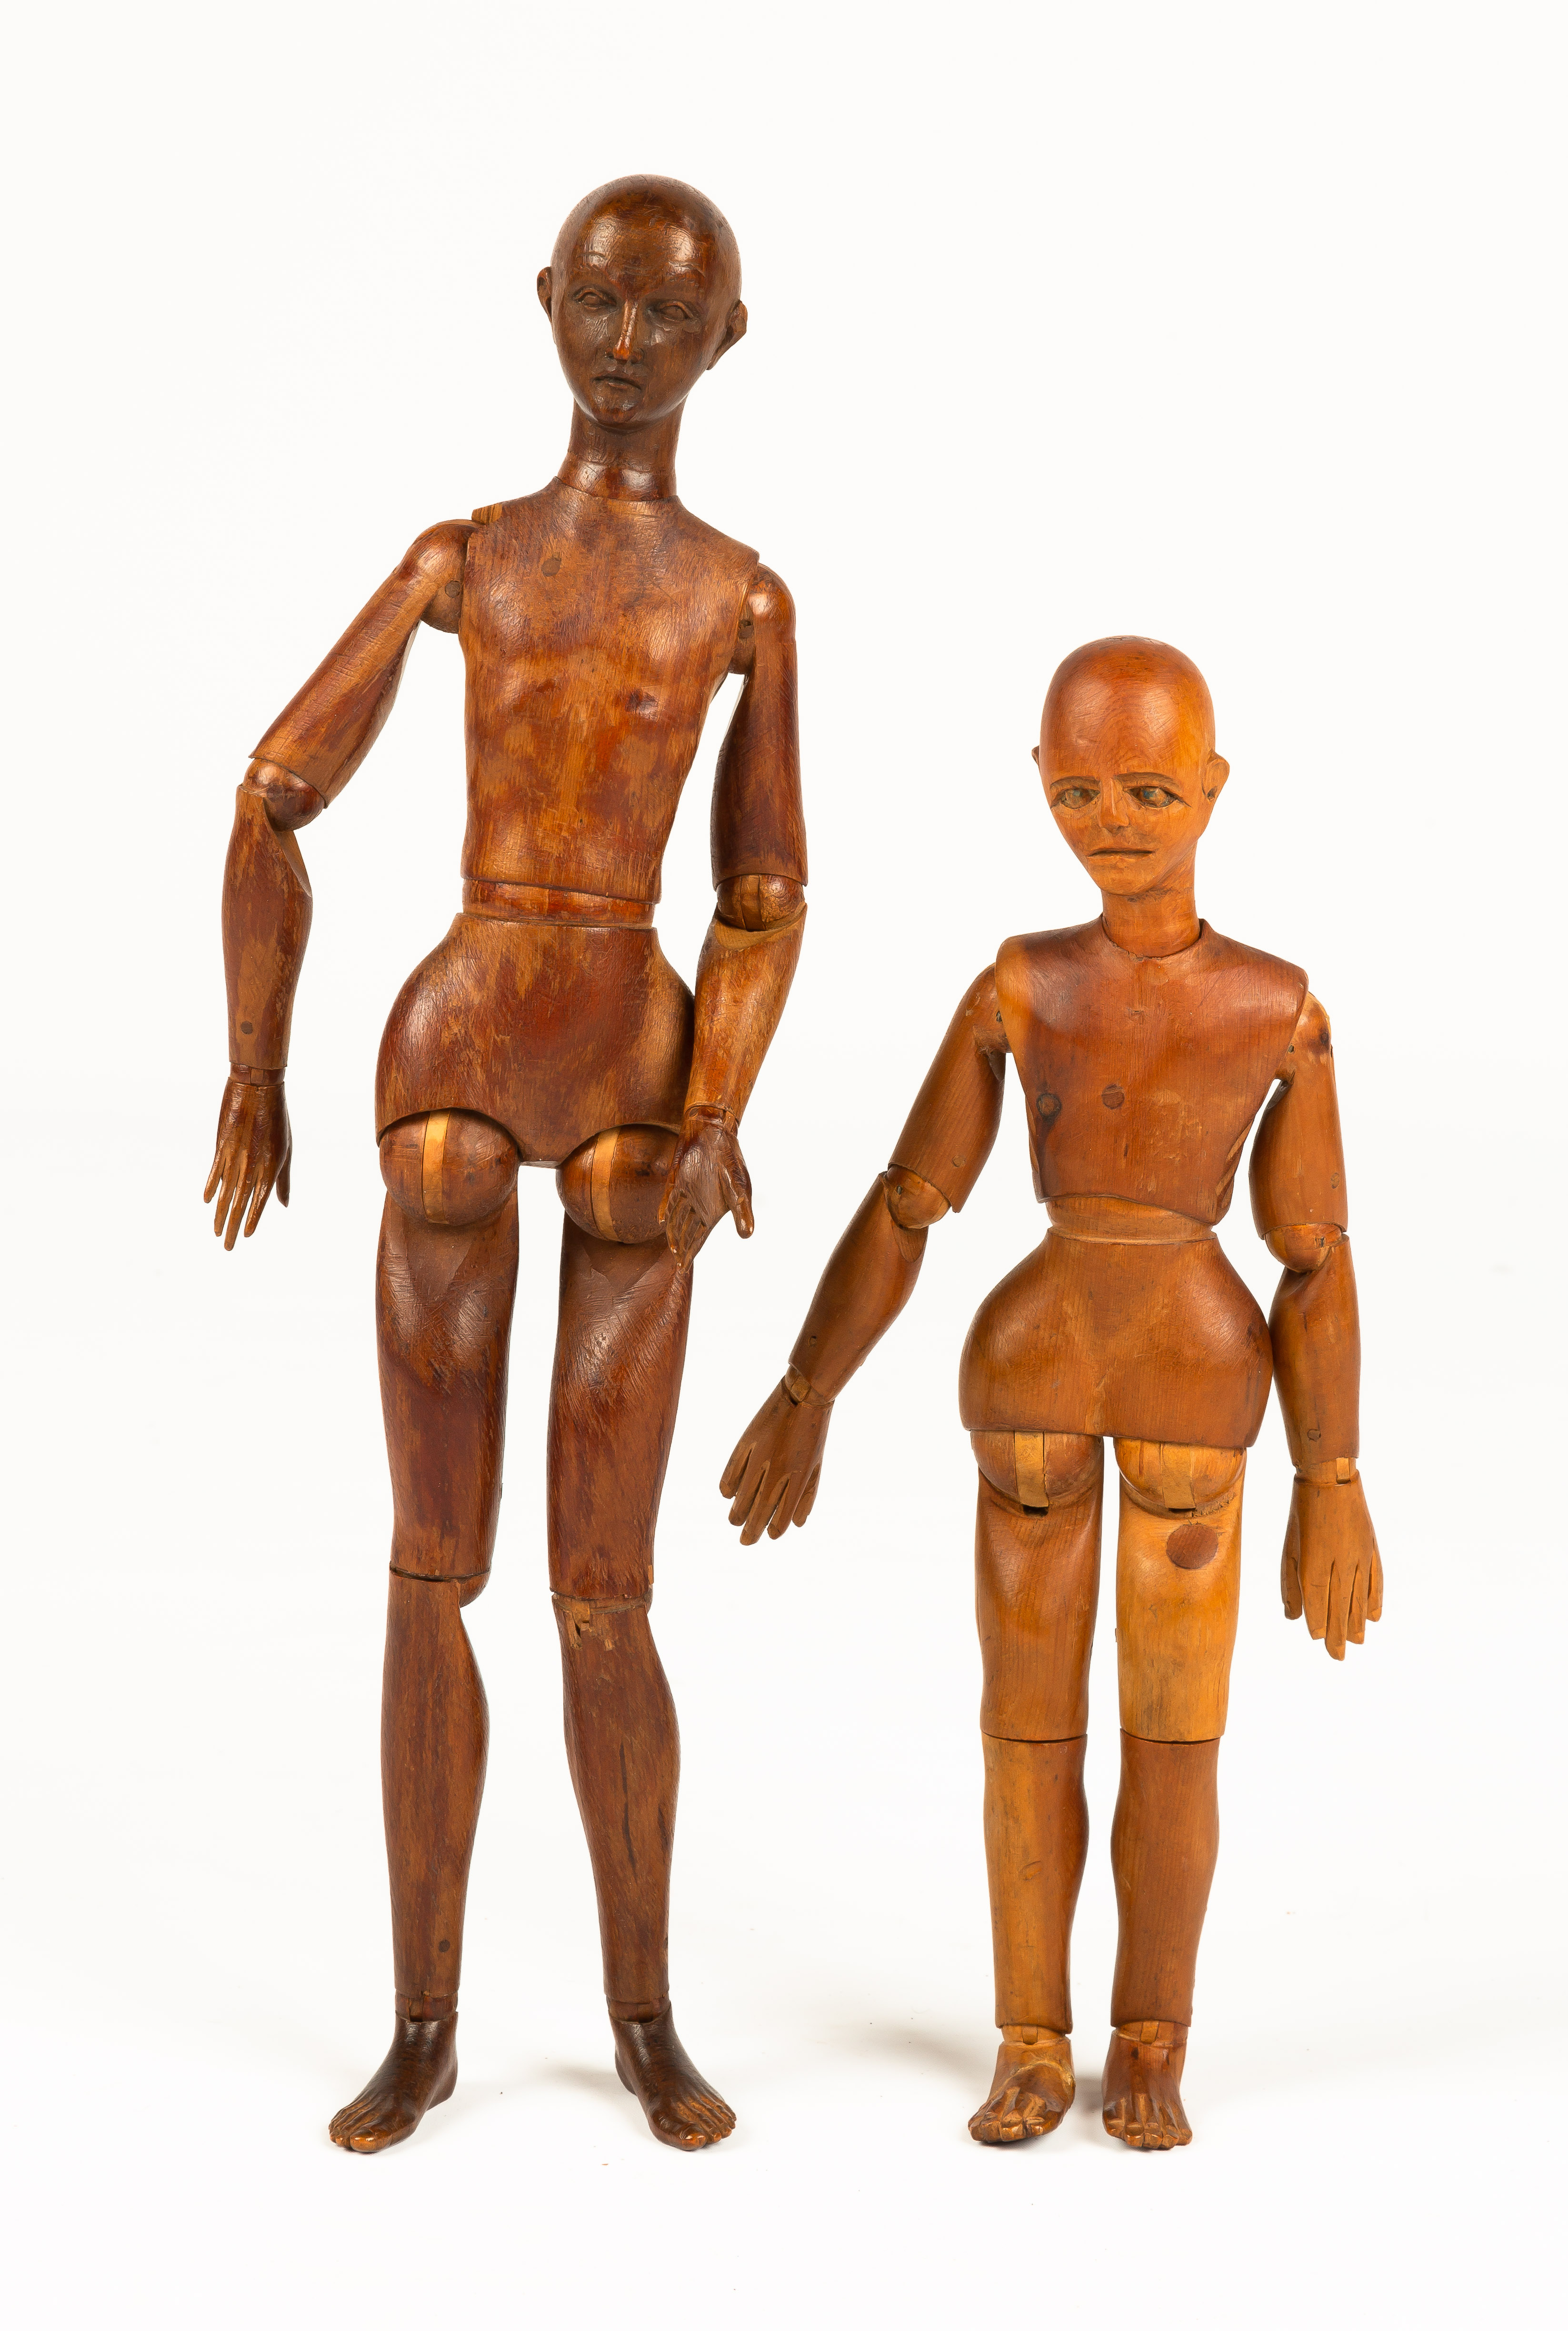 TWO RETICULATED ARTIST MODELS Two 3529e2